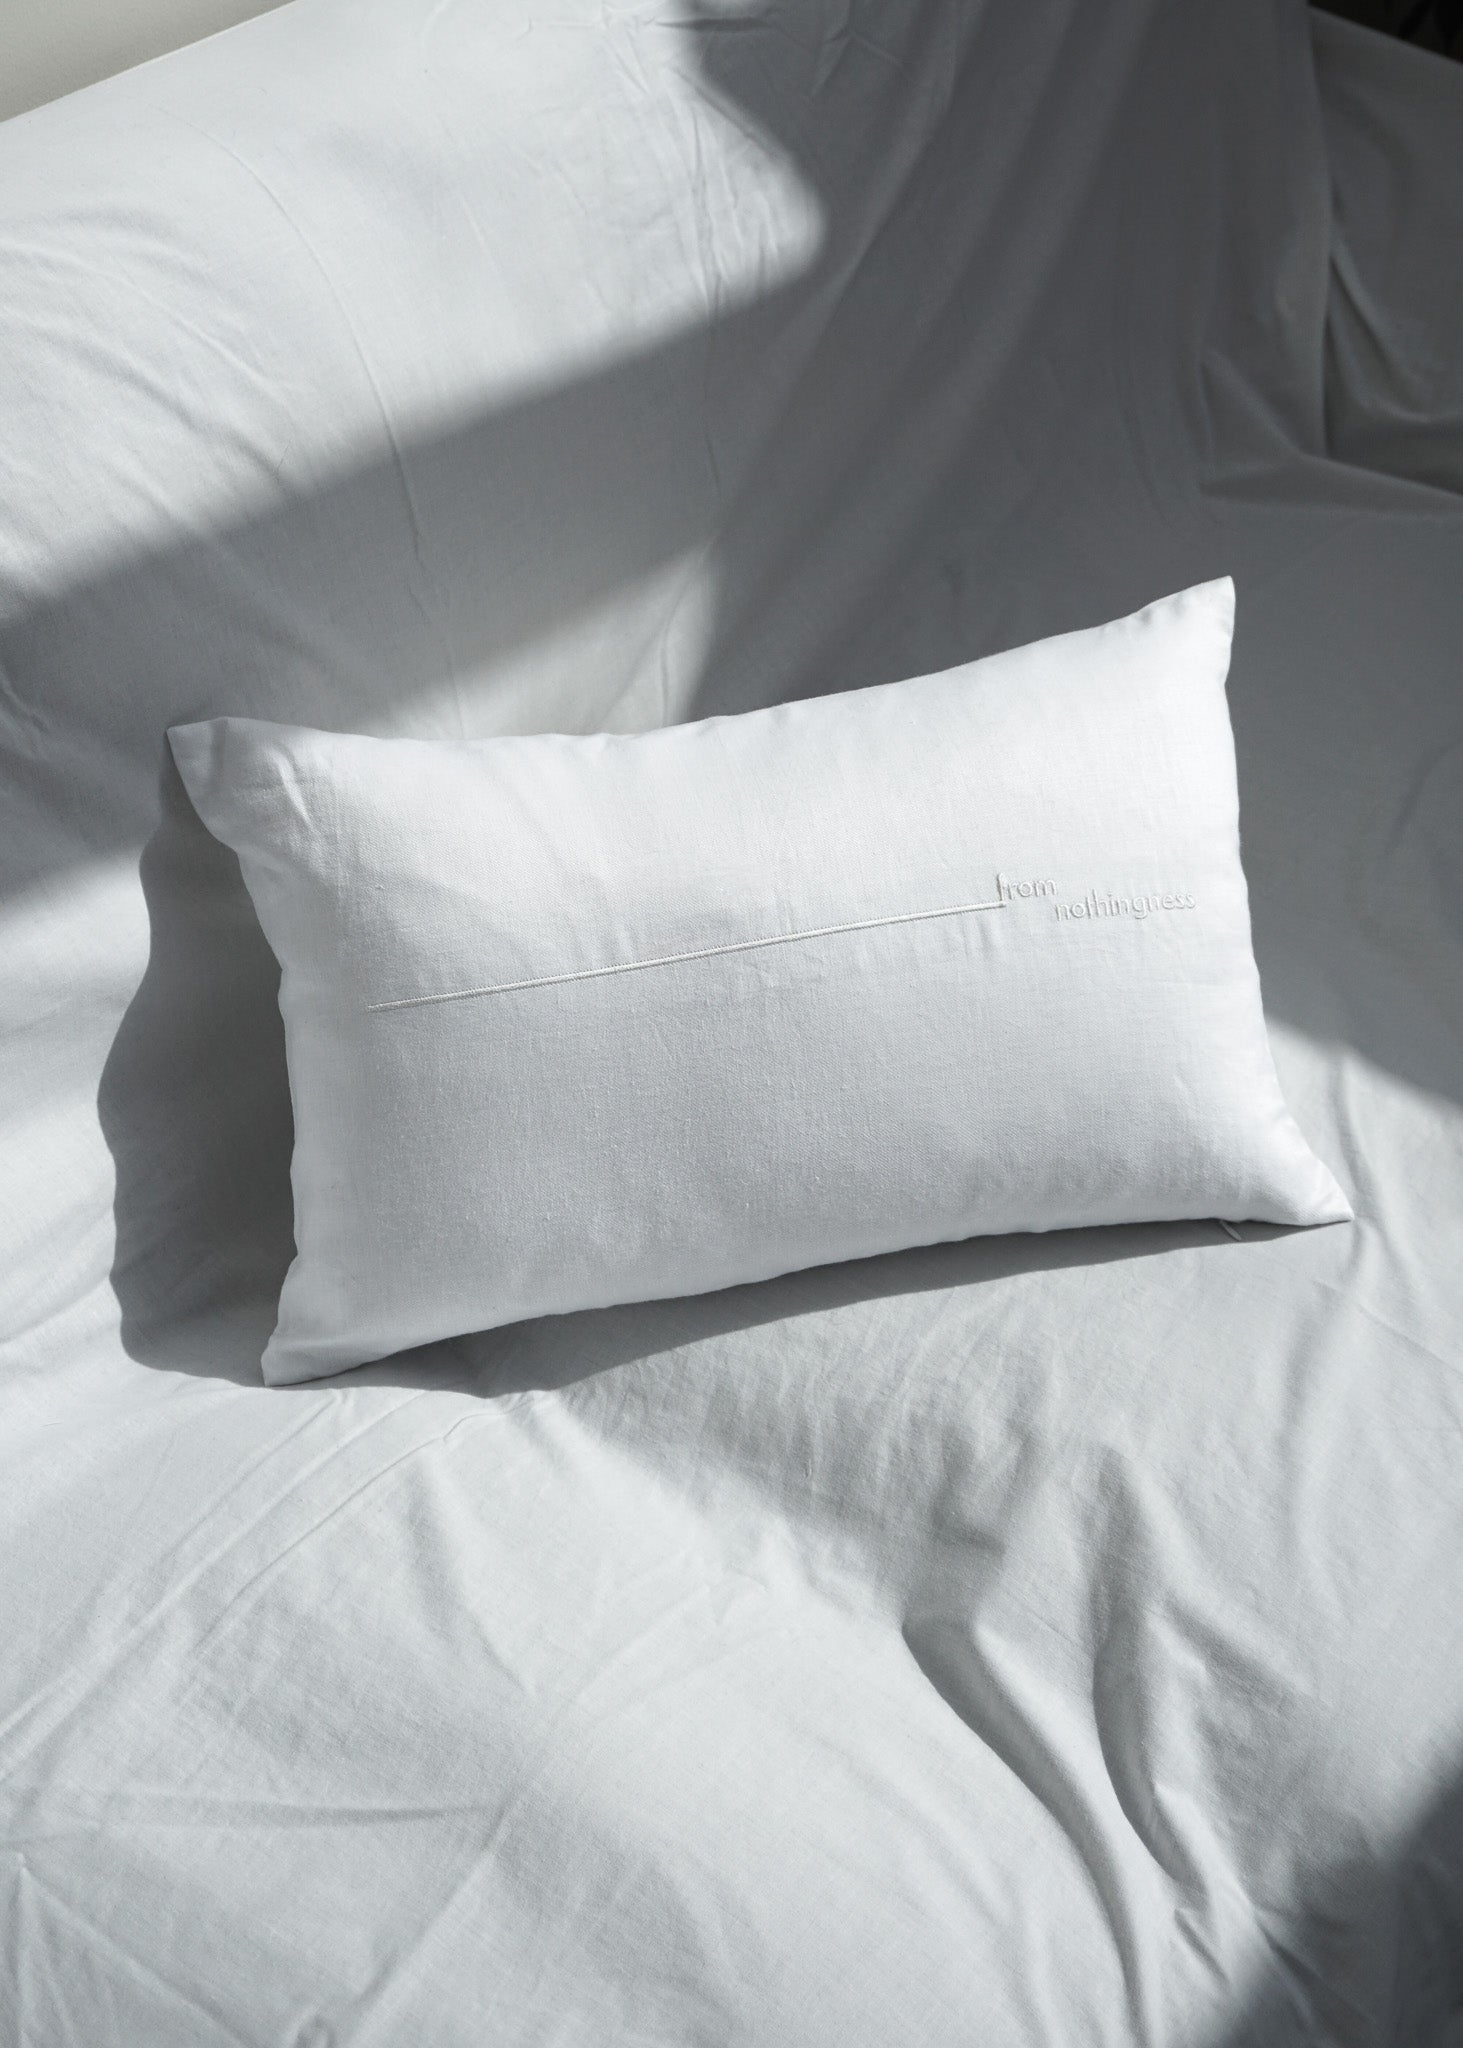 A pillow from nothingness